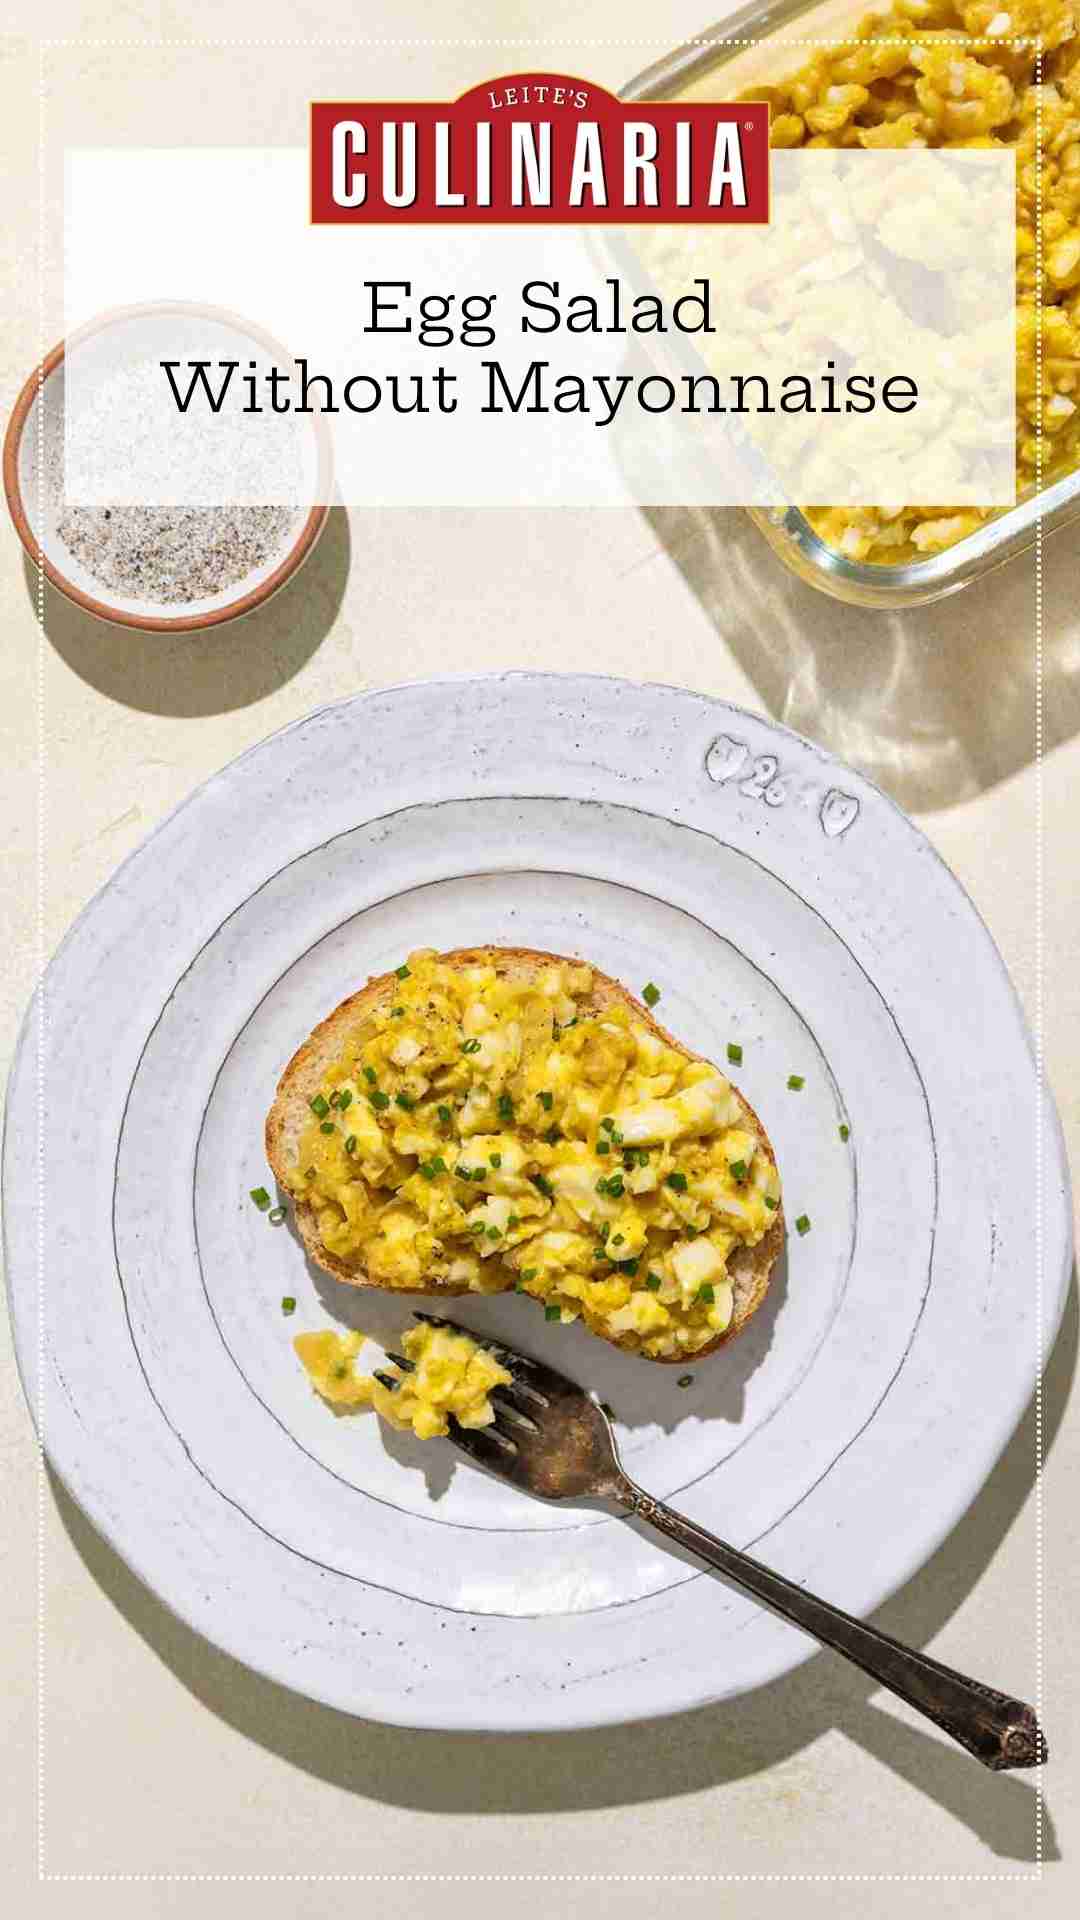 An open-faced egg salad sandwich topped with minced chives on a white plate with a bowl of salad and a dish of salt and pepper nearby.